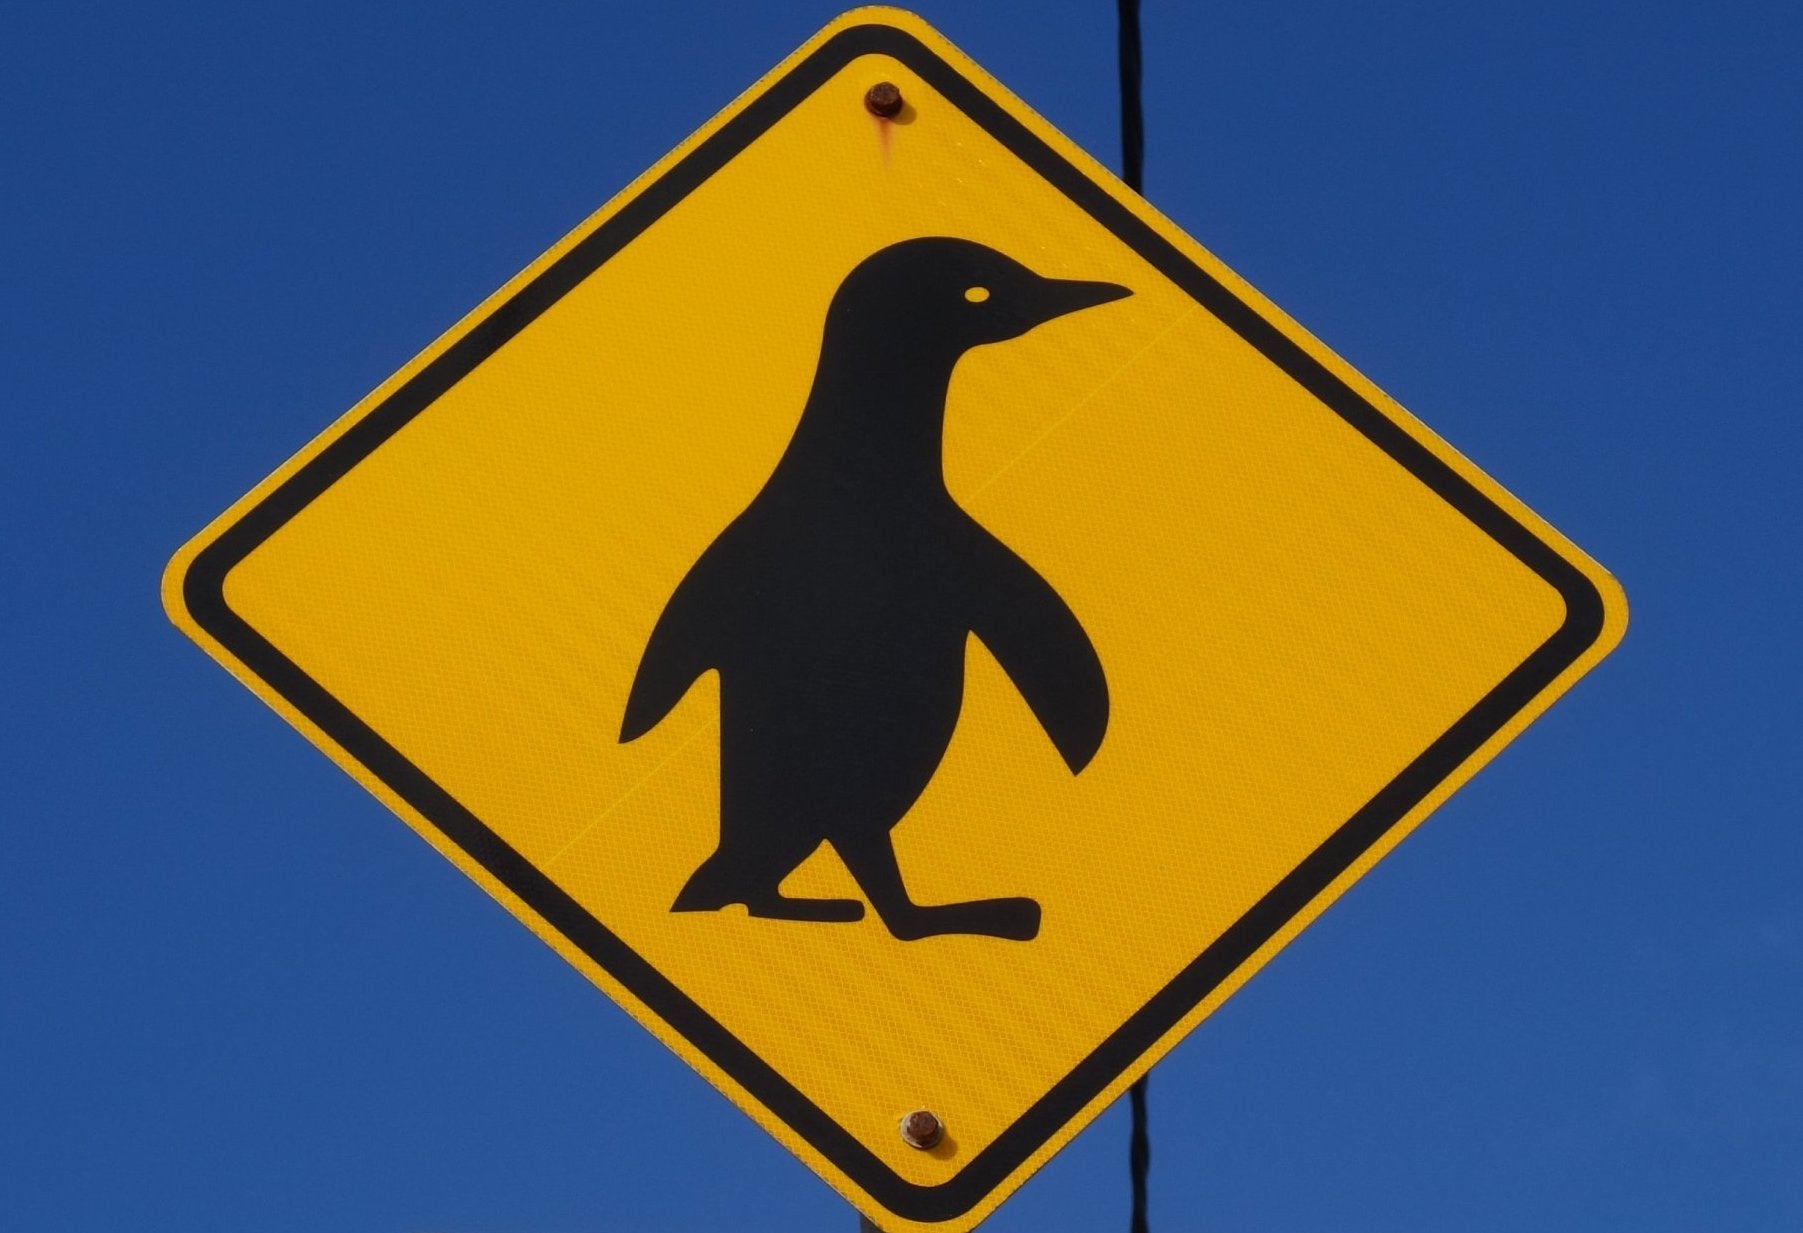 Street sign depicting a cartoon image of a penguin for penguin crossing